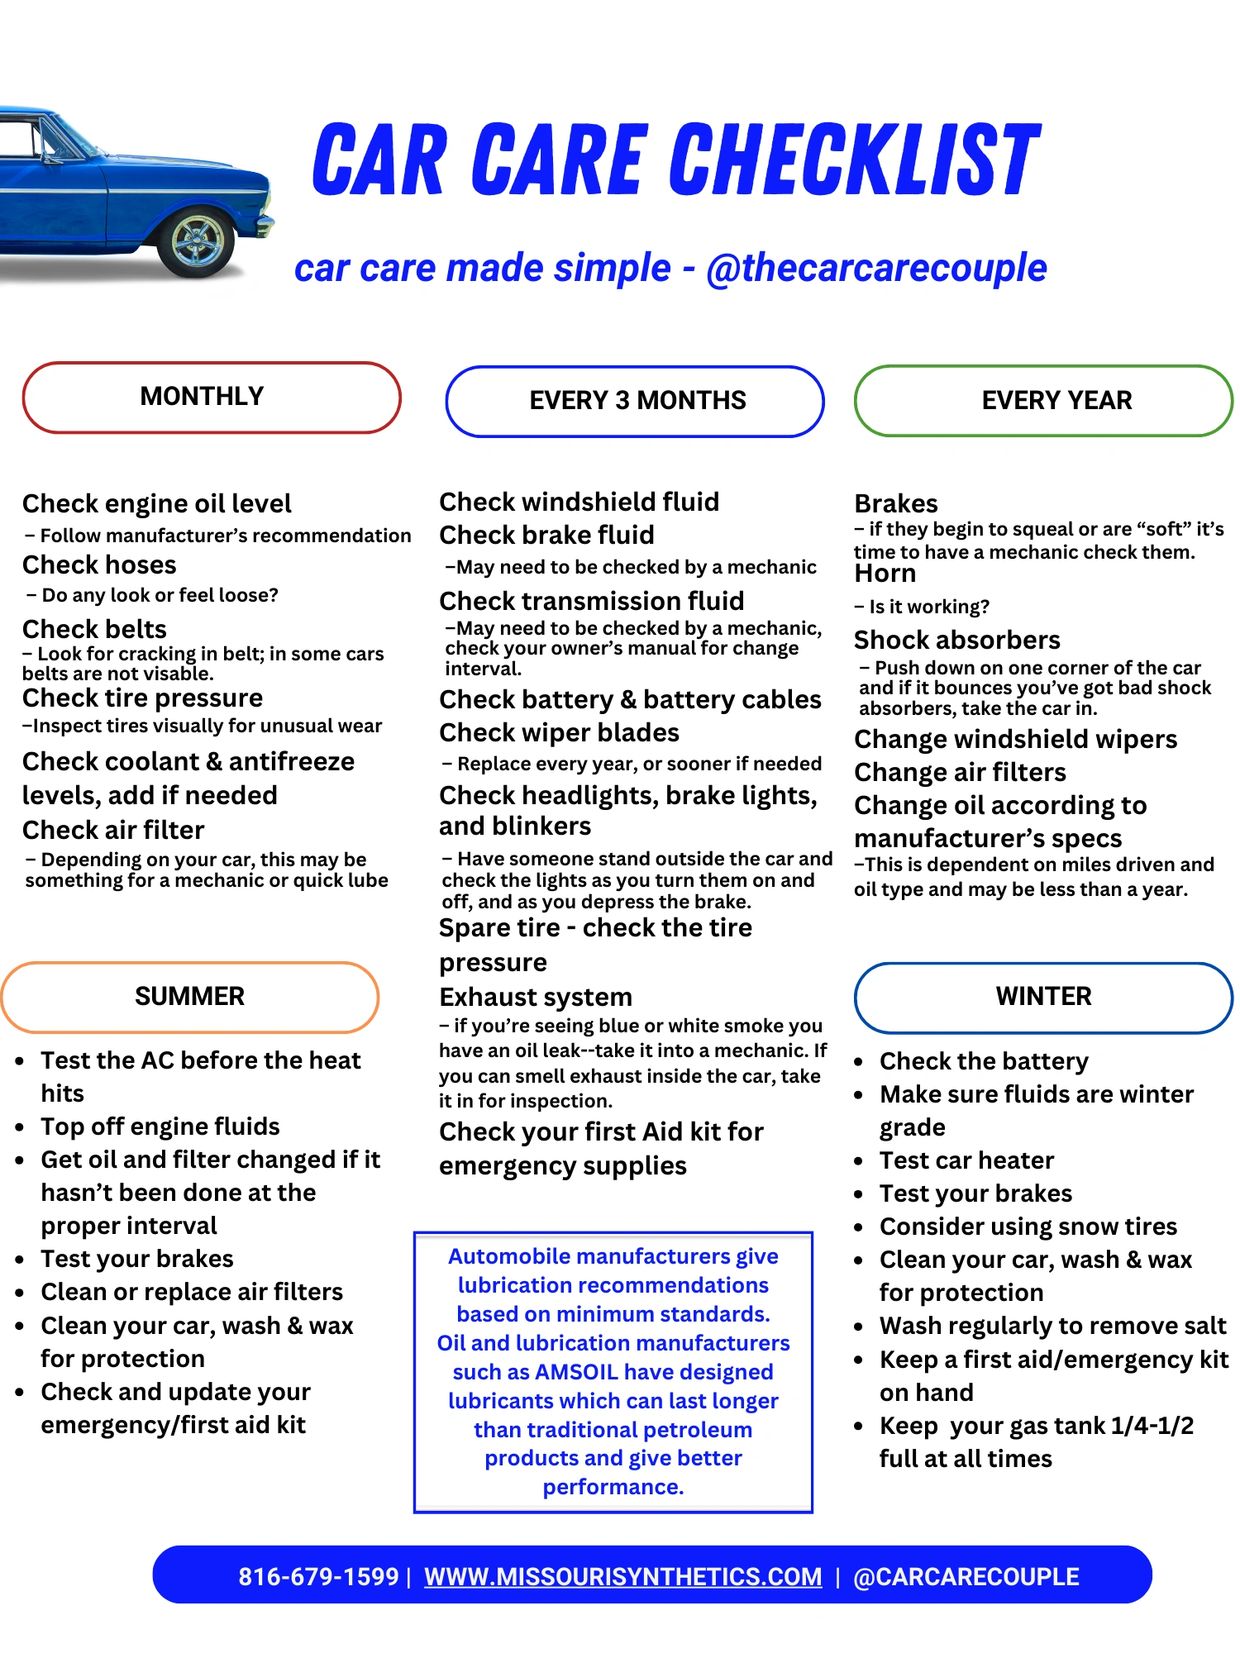 Don't miss out on those important maintenance tasks for your vehicles. Refer to our handy Car Care C